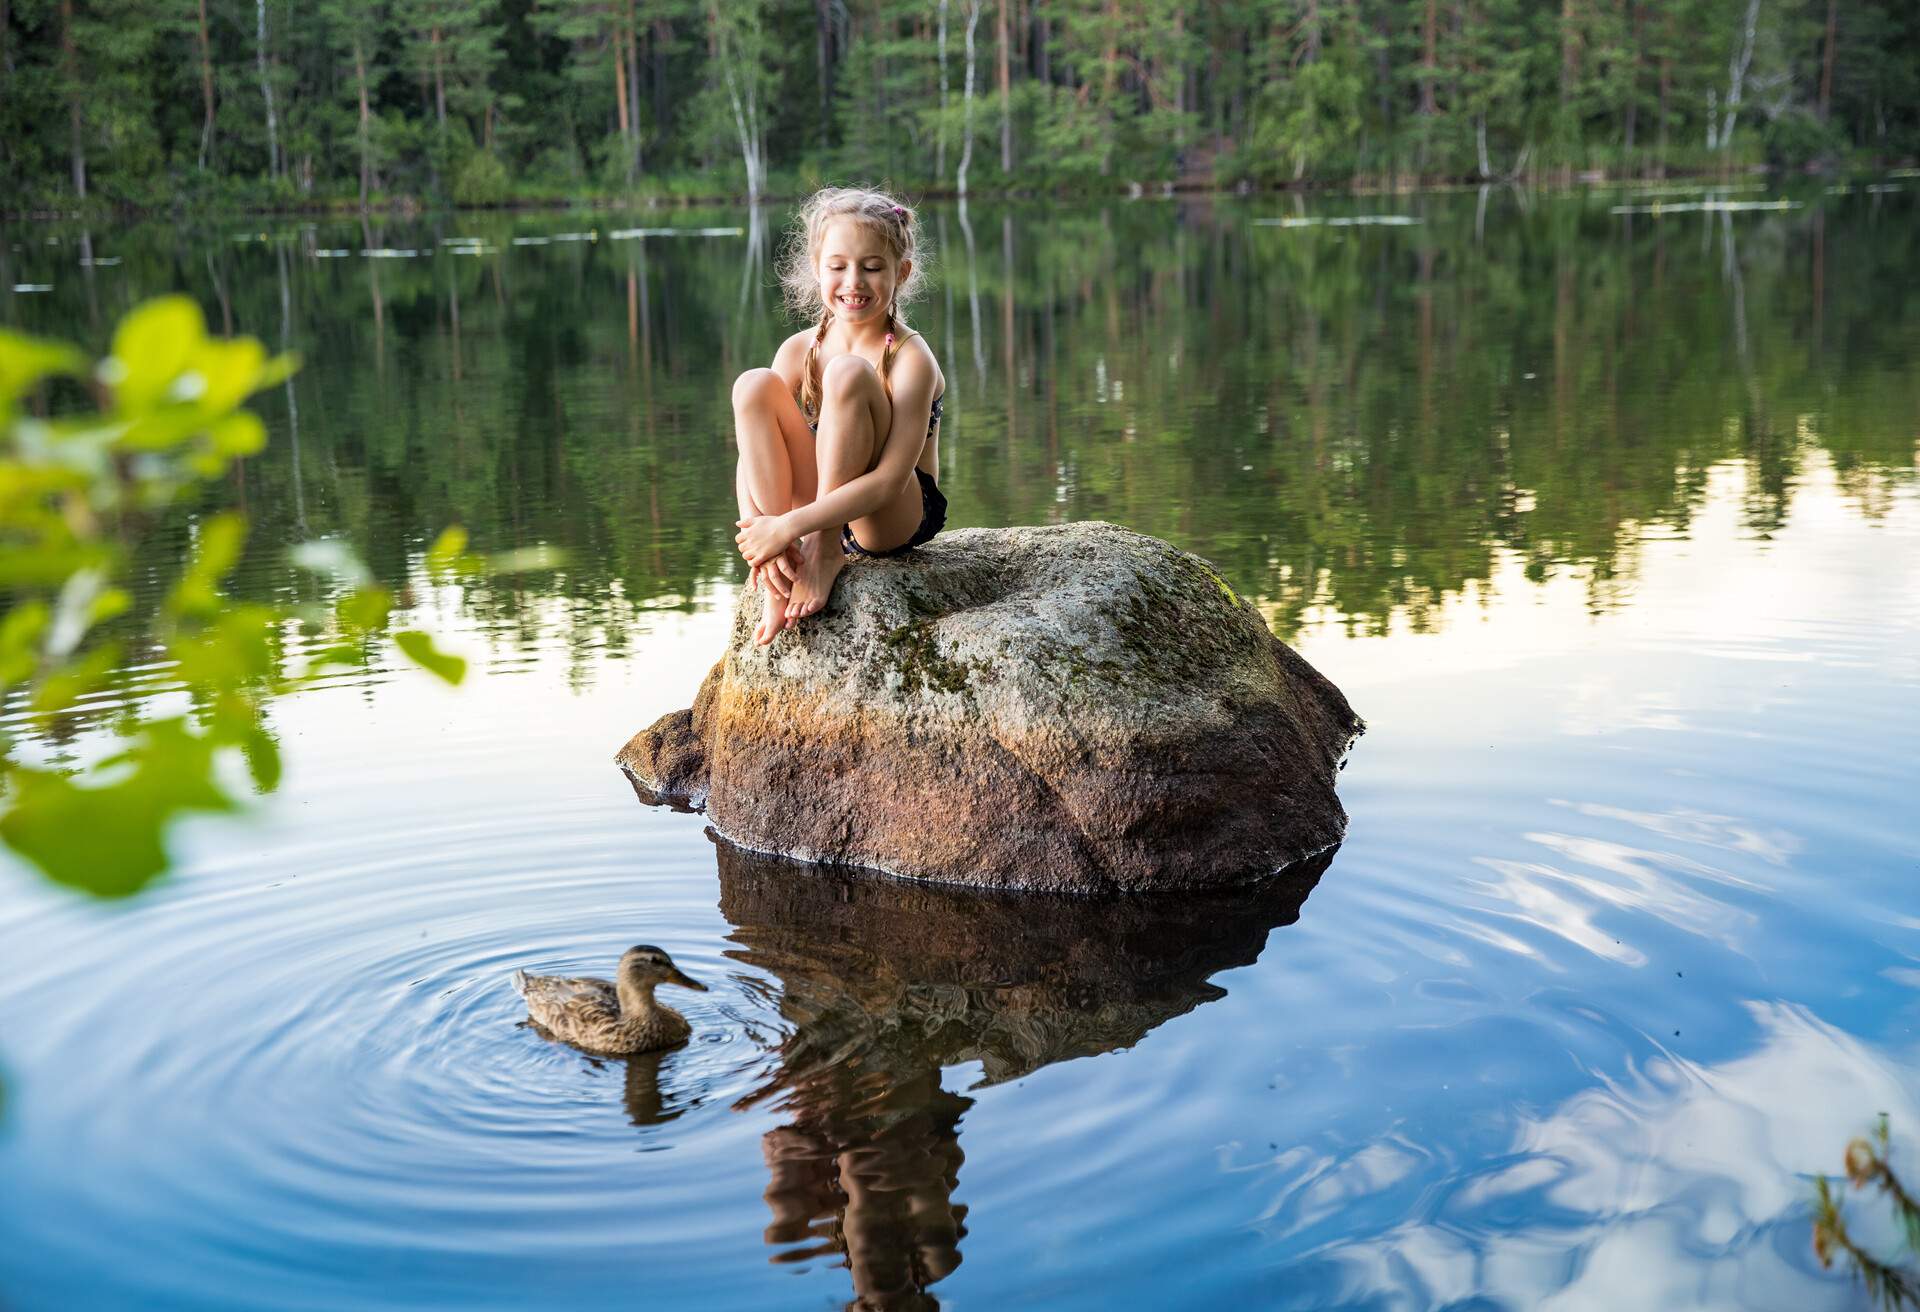 DEST_FINLAND_THEME_PEOPLE_GIRL_LAKE_DUCK_GettyImages-1308639141